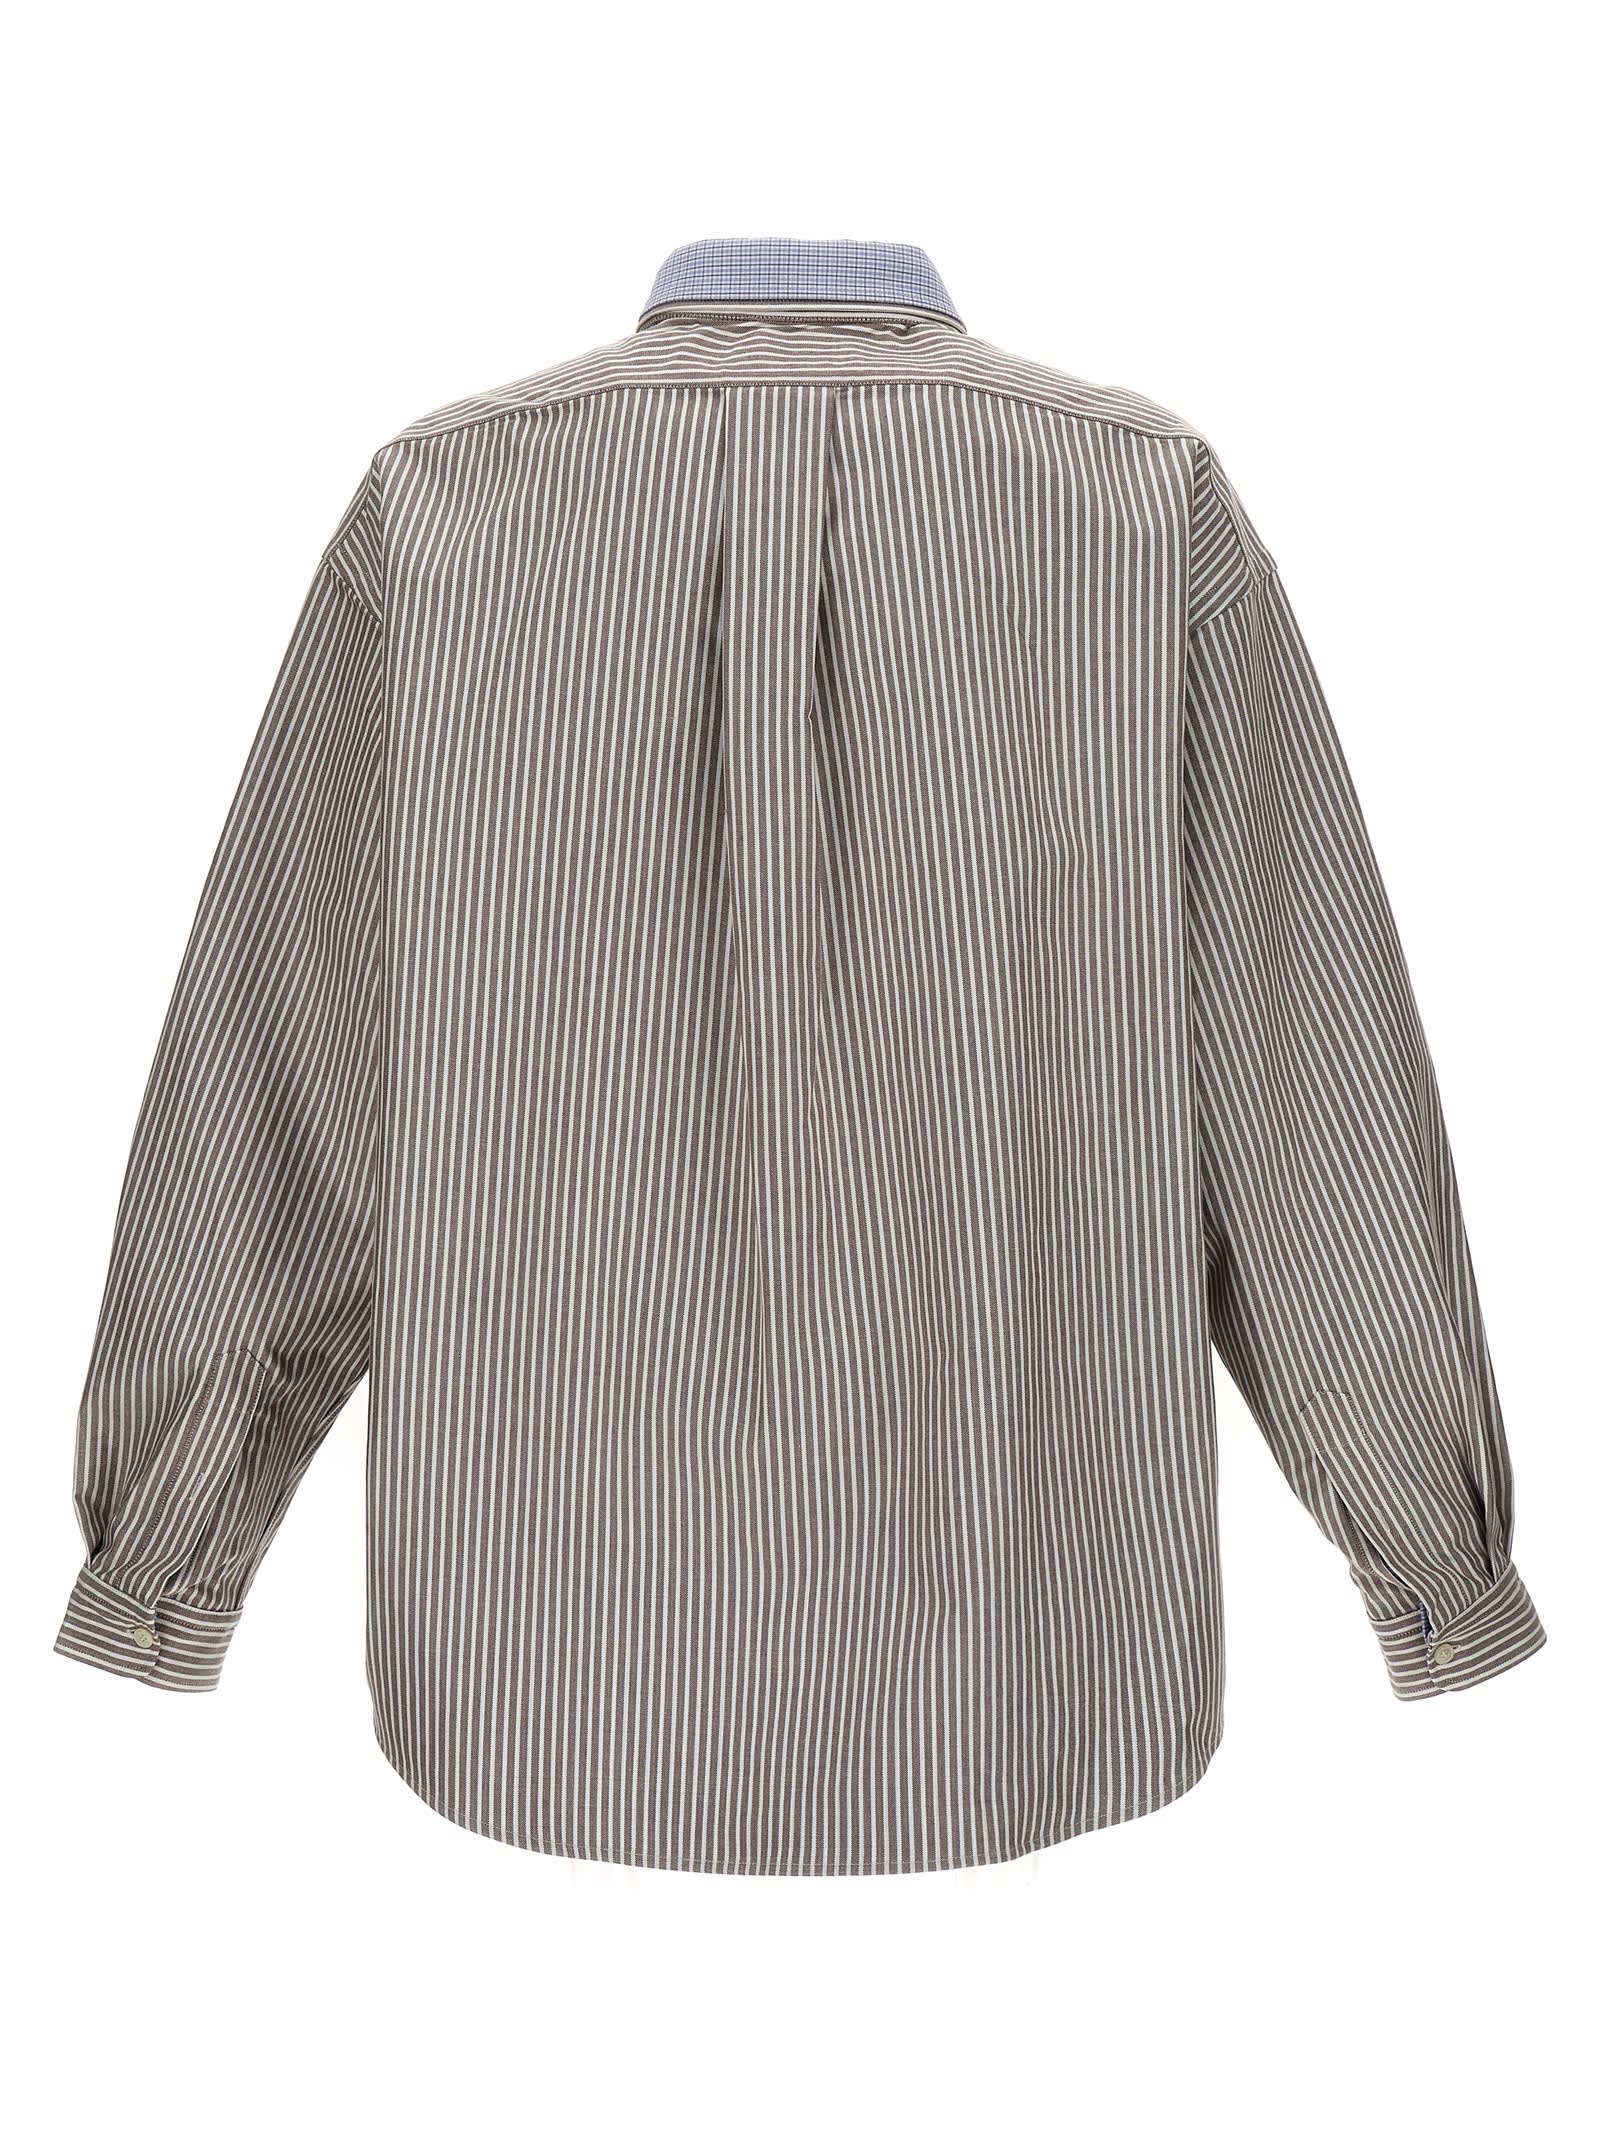 Shop Hed Mayner Pinstripe Oxford Shirt In White